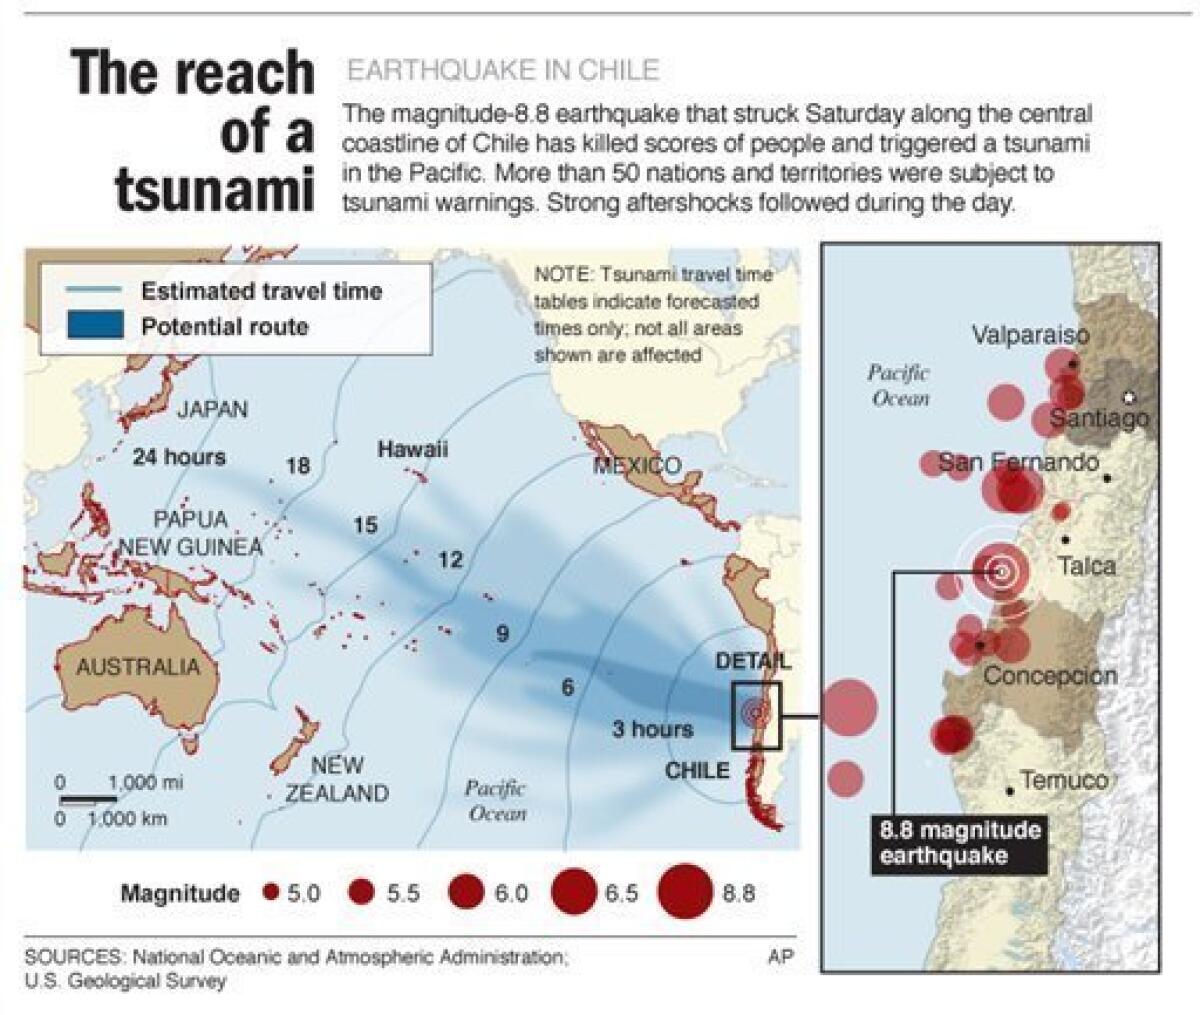 Map shows pacific tsunami warning areas with estimated wave travel timeline; includes Chile quake epicenter map with population data